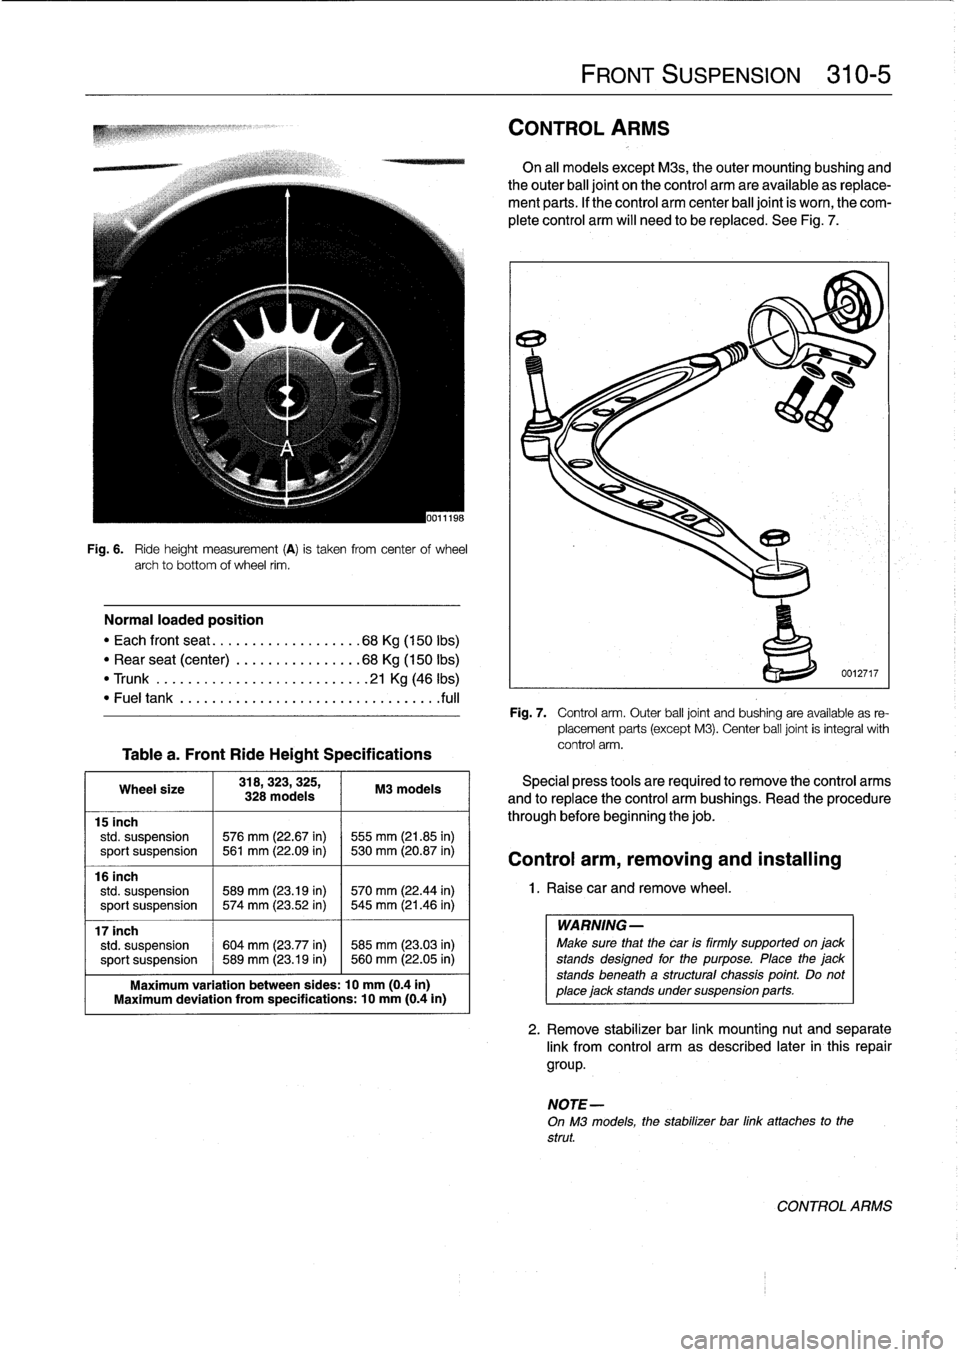 BMW M3 1993 E36 Owners Manual 
Fig
.
6
.

	

Ride
height
measurement
(A)
is
taken
from
centerof
wheel
archto
bottom
of
wheel
rim
.

Normal
loaded
position

"
Each
front
seat
...
...
.
..
..........
68Kg
(150
Ibs)

"
Rear
seat
(cen